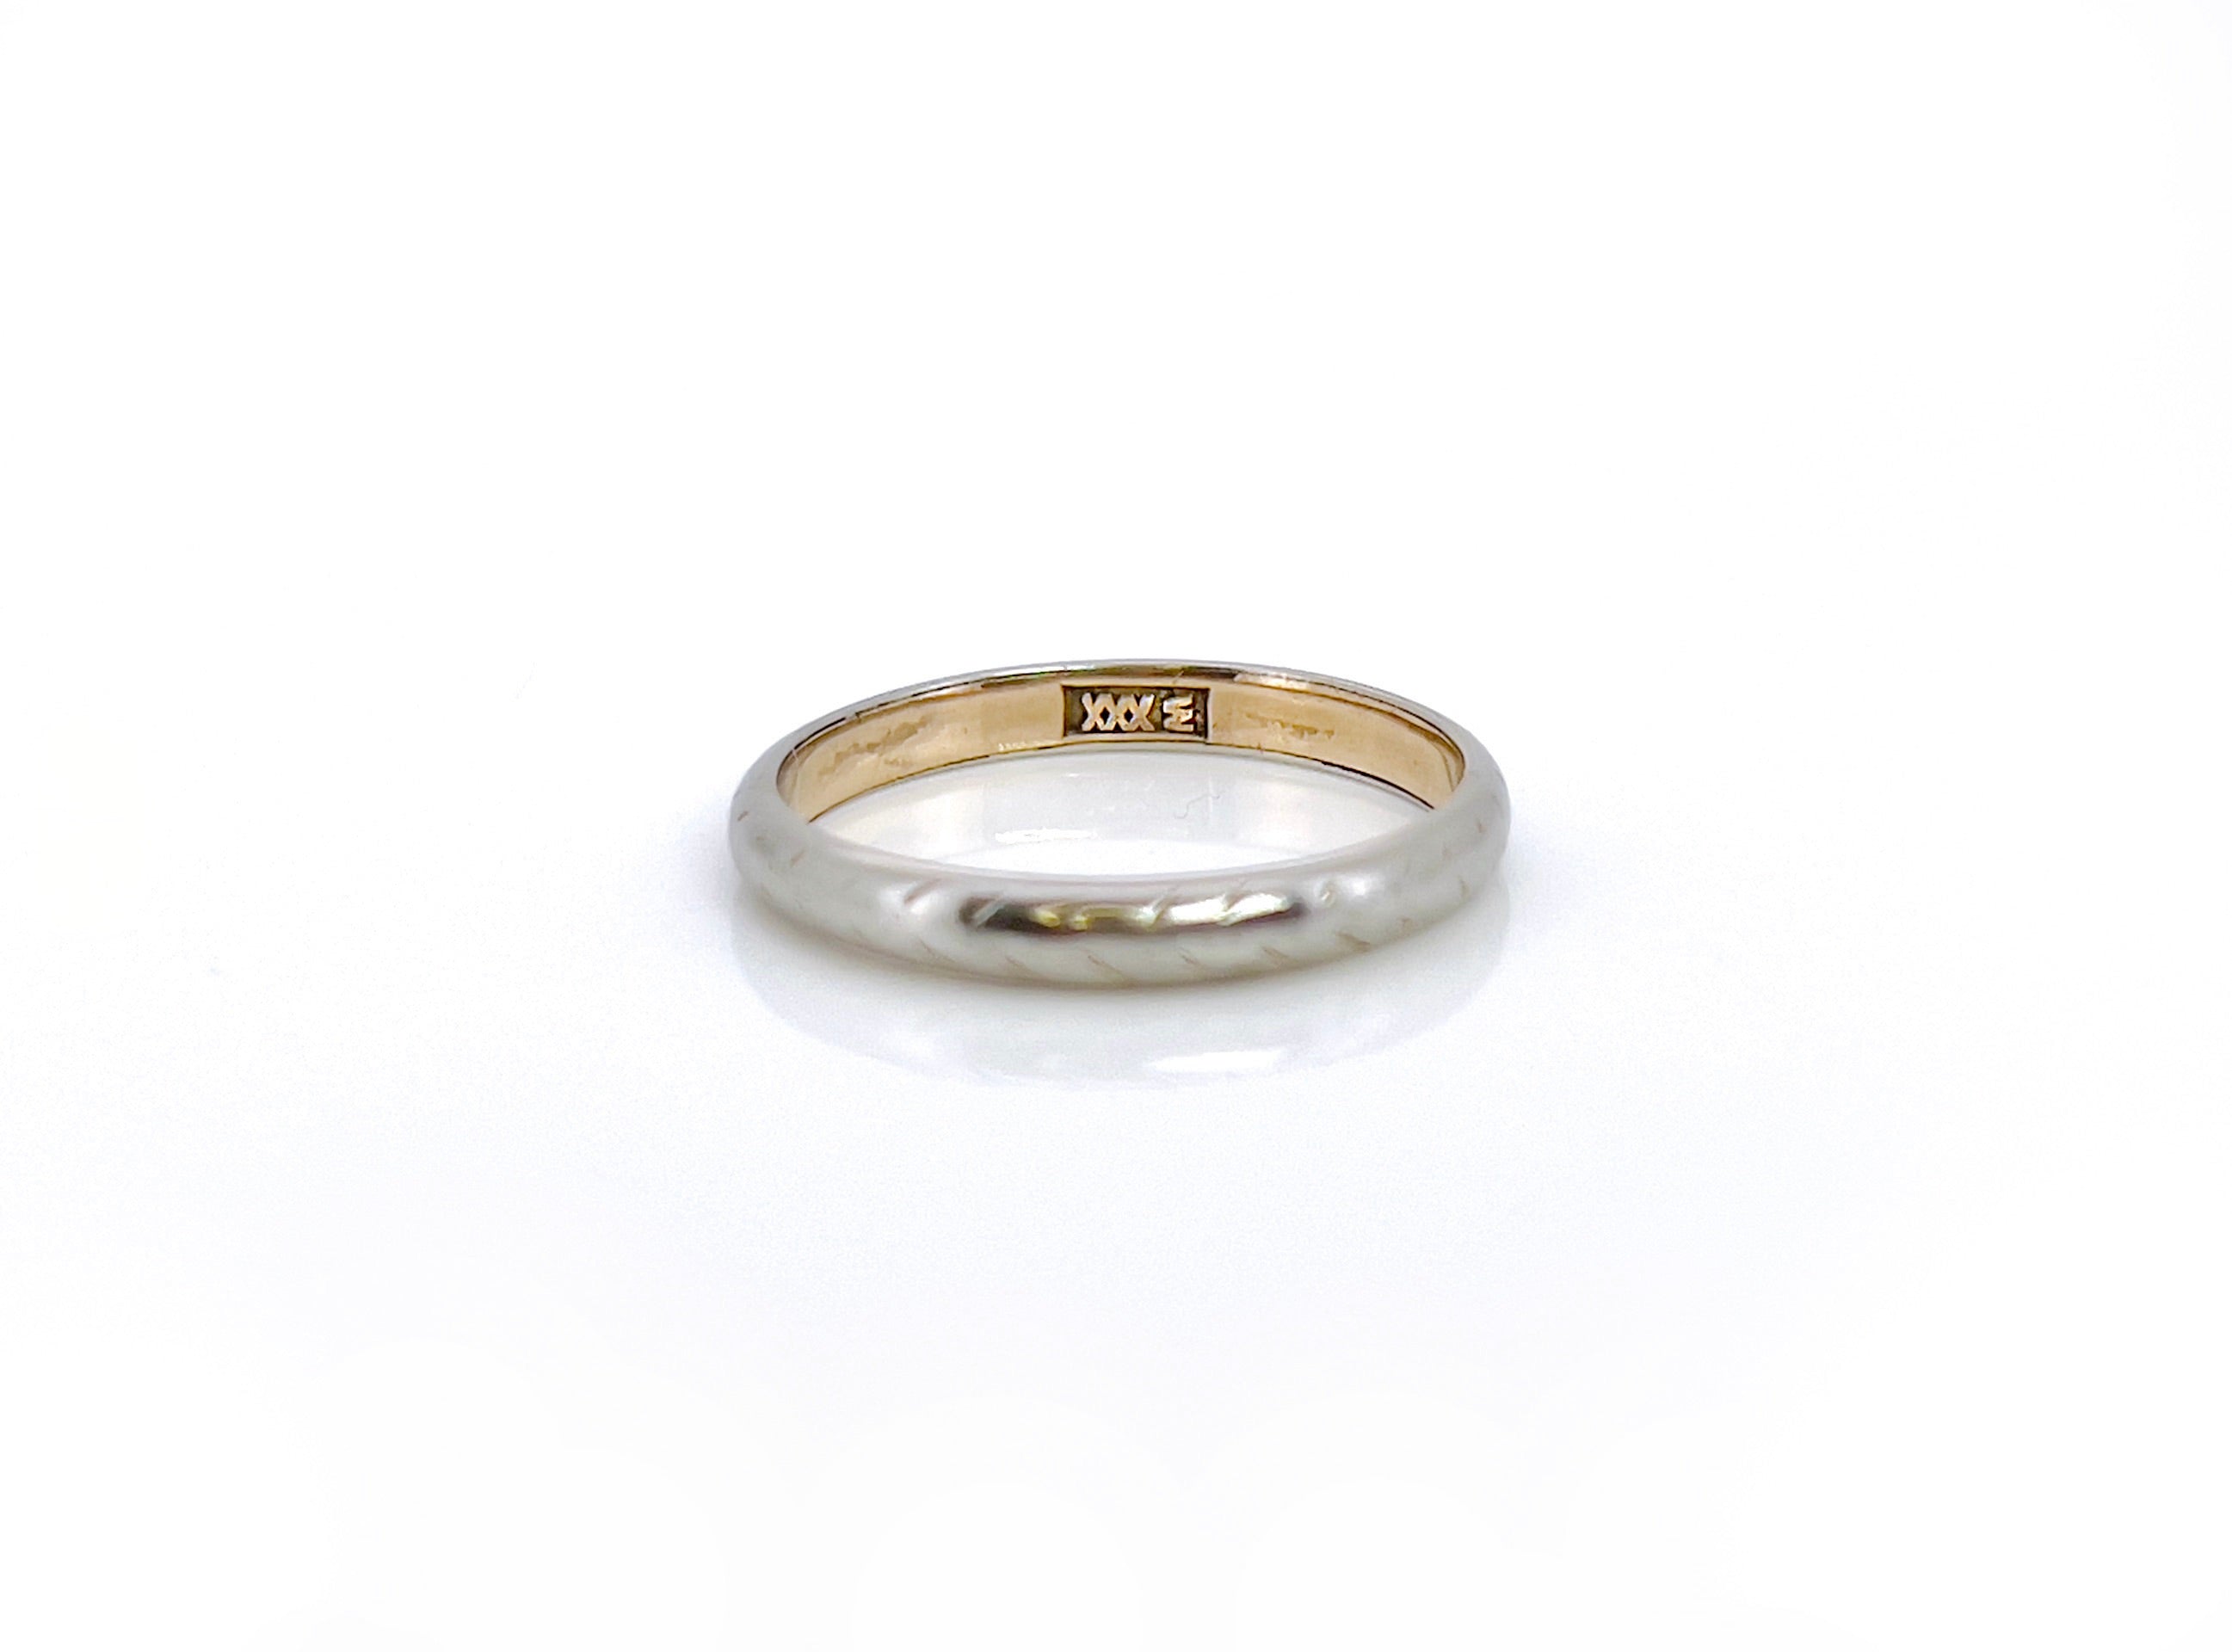 JR Wood Two Tone Gold Ring, Vintage, Size 5.5